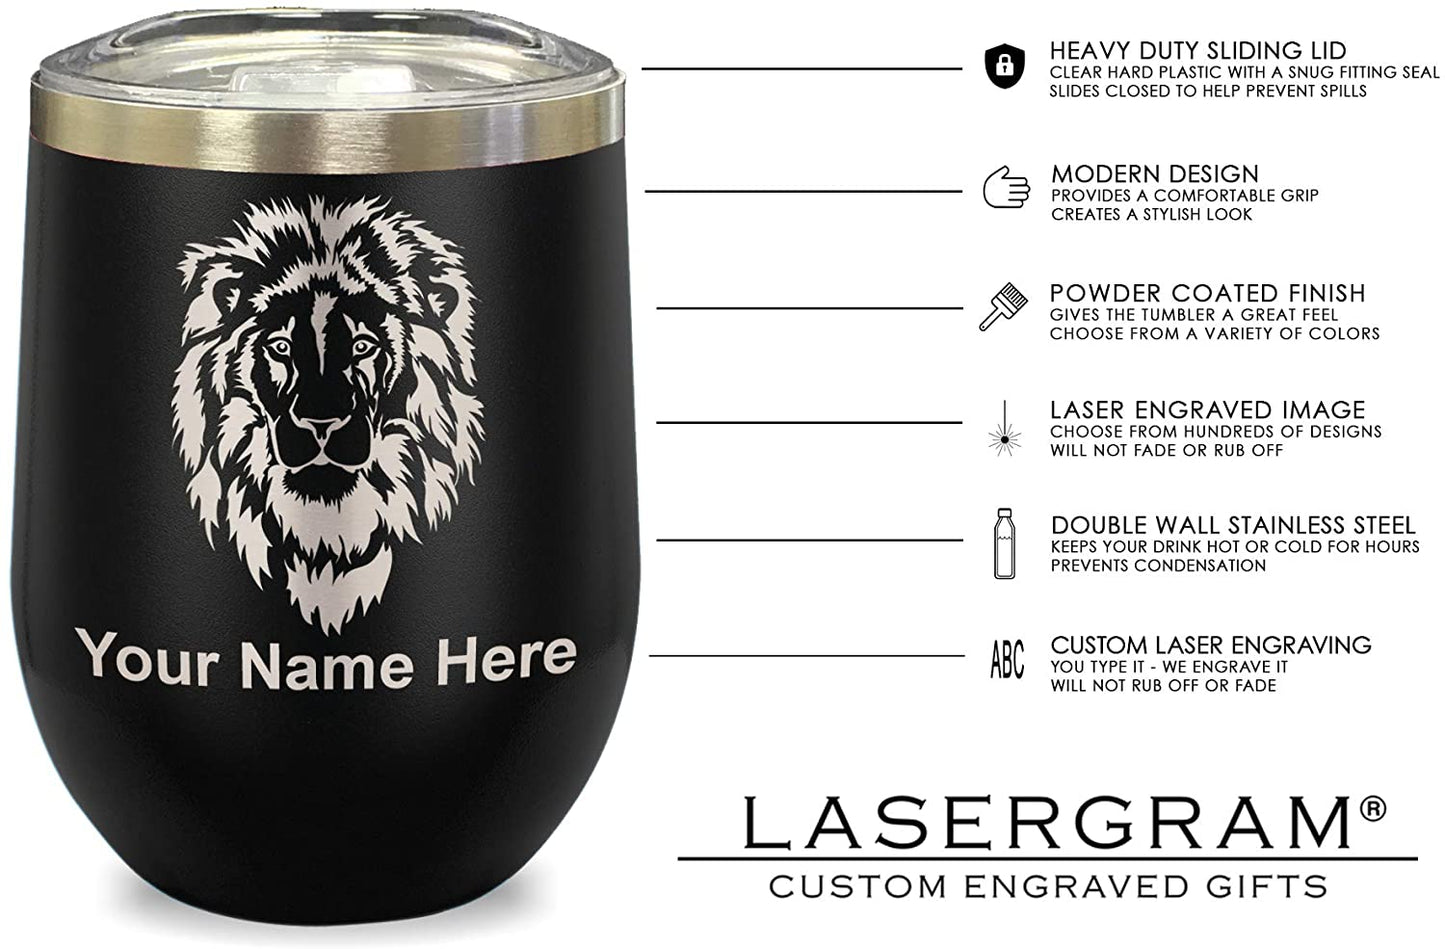 LaserGram Double Wall Stainless Steel Wine Glass, Zodiac Sign Gemini, Personalized Engraving Included